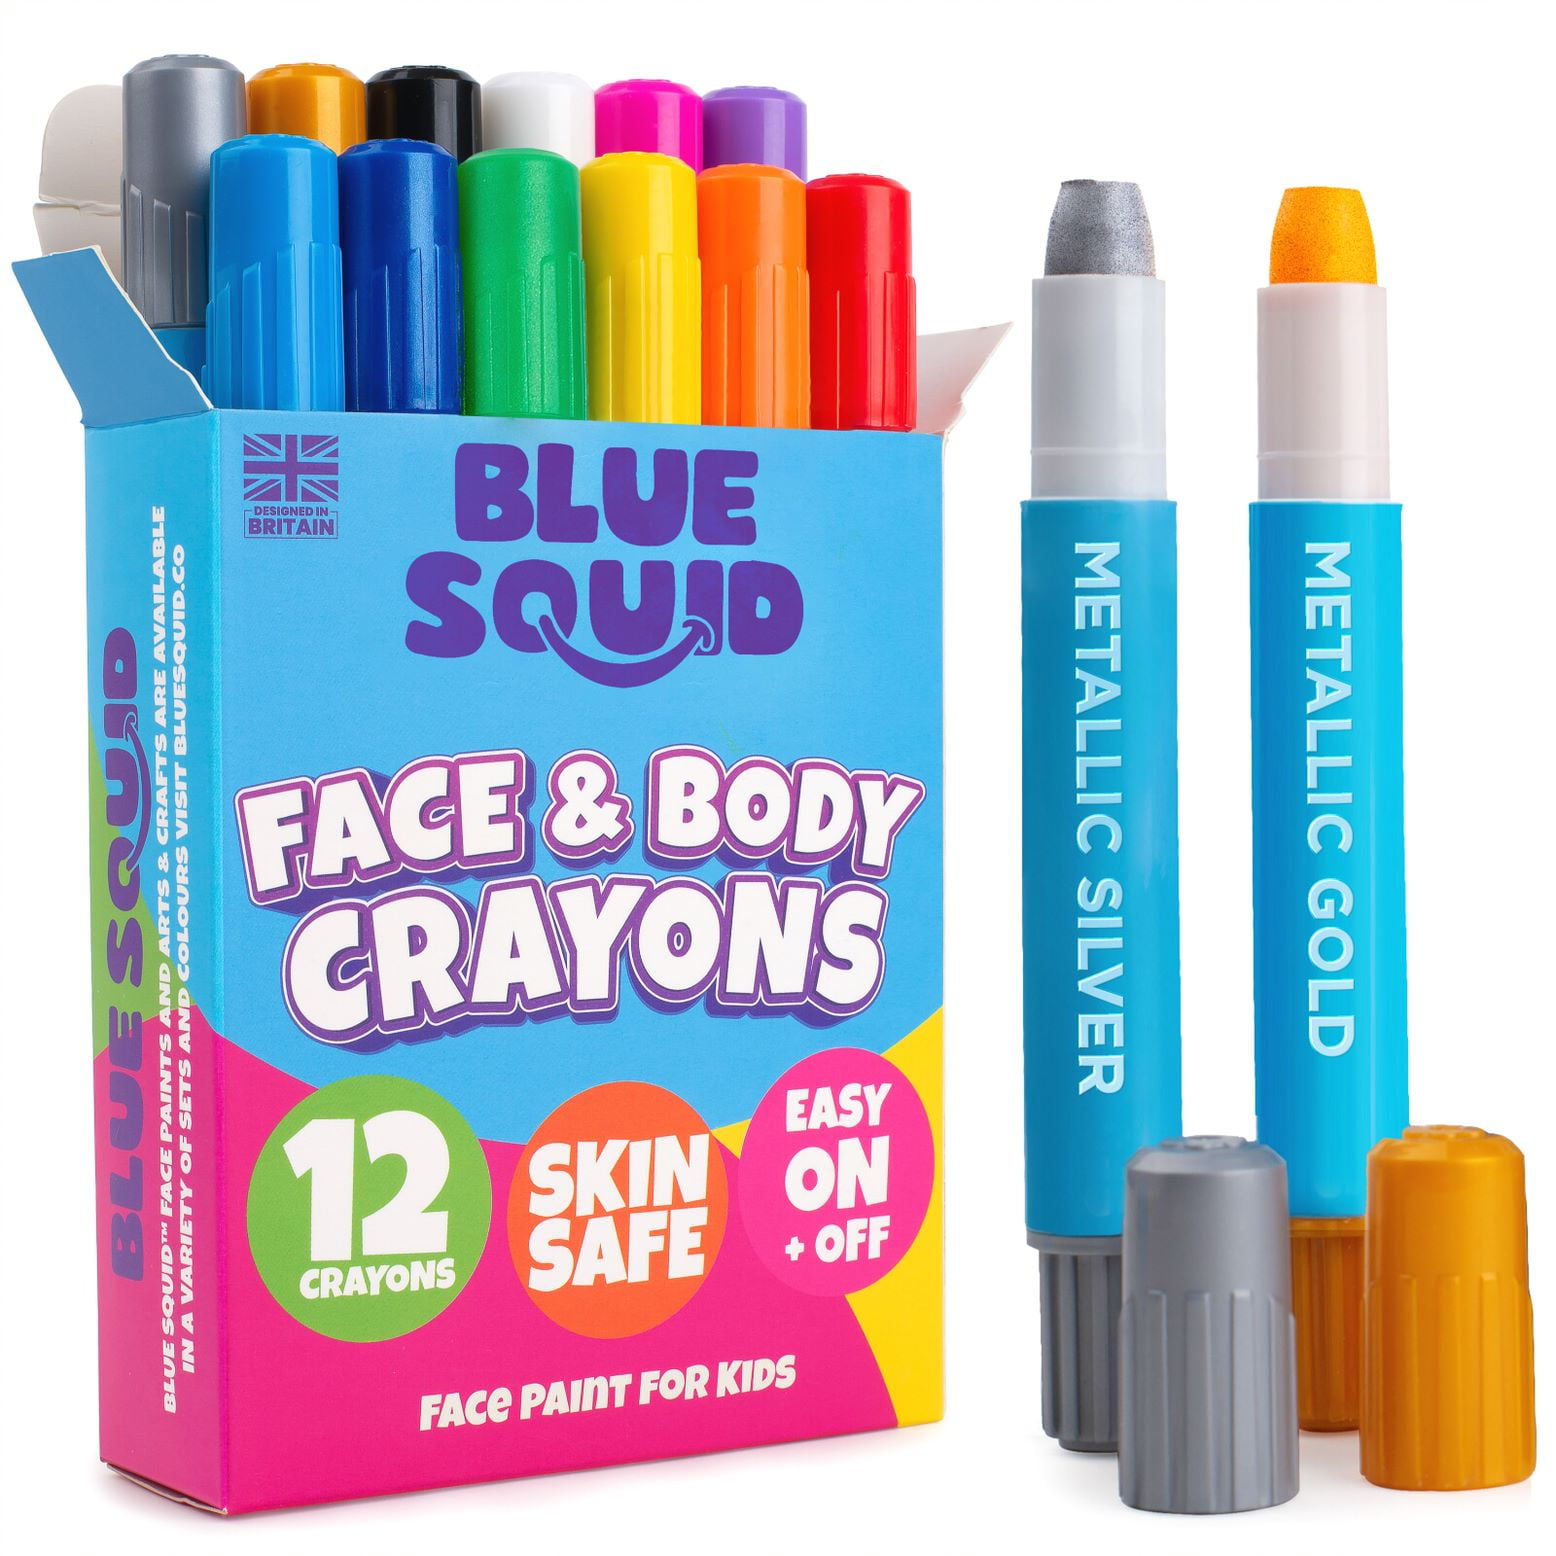 Blue Squid 12 Twistable Face Paint Crayons for Kids - Body and Face  Painting Kit Makeup Sticks